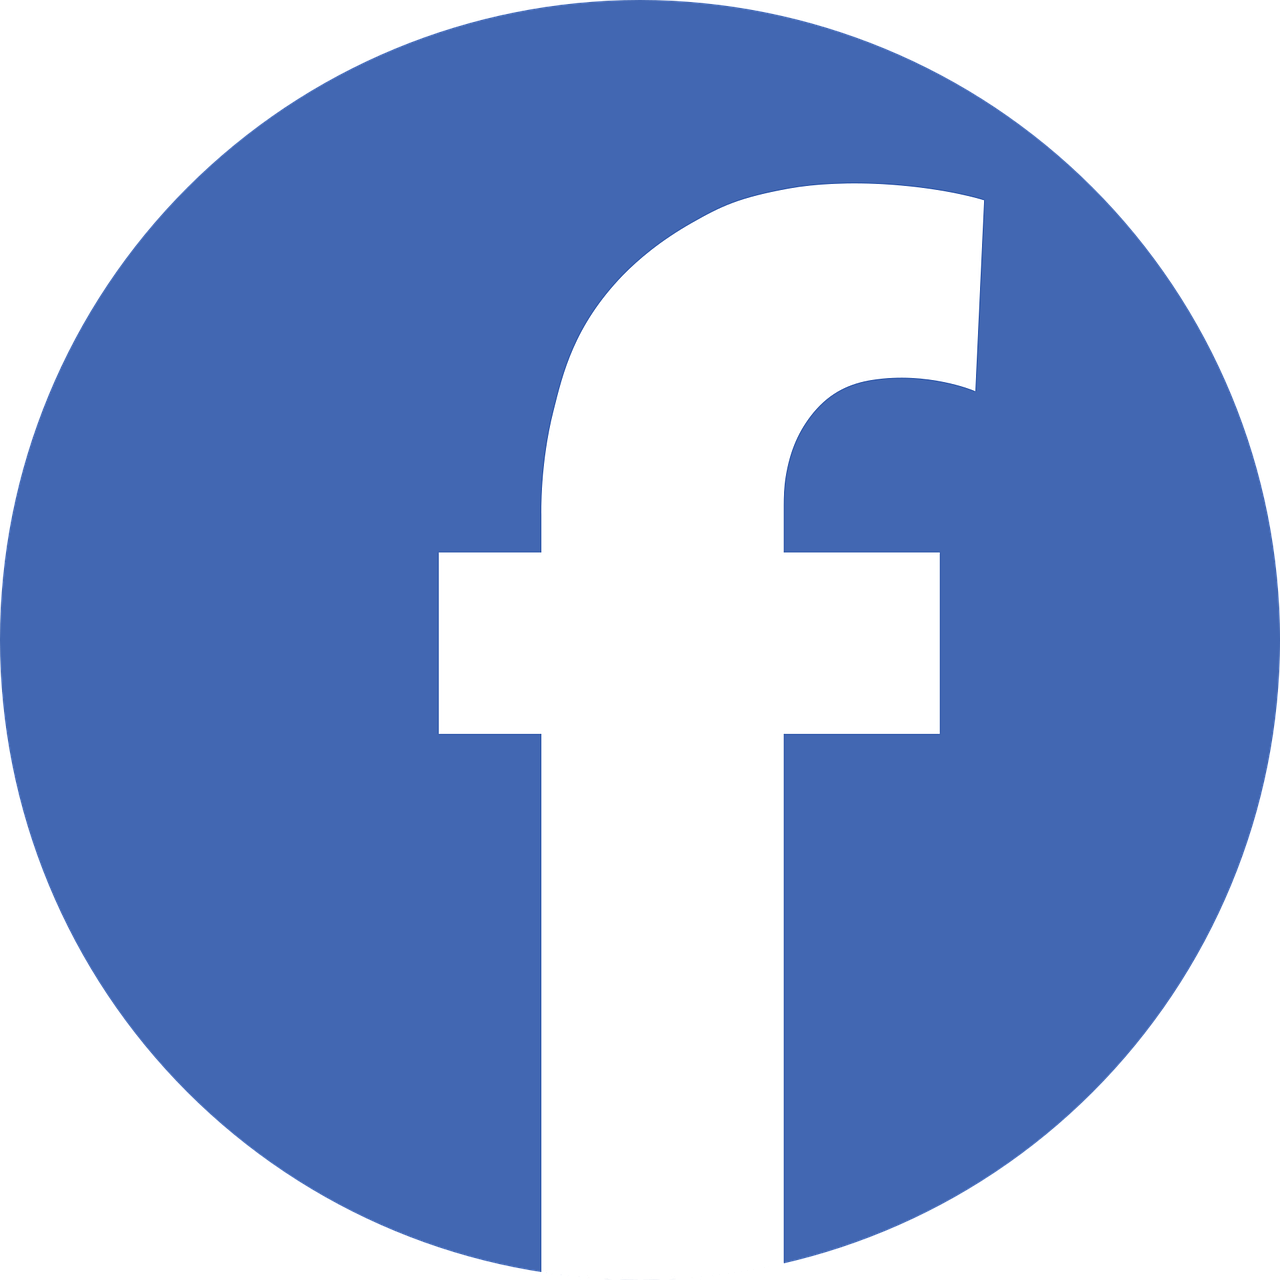 Facebook's logo, blue background with white letter f